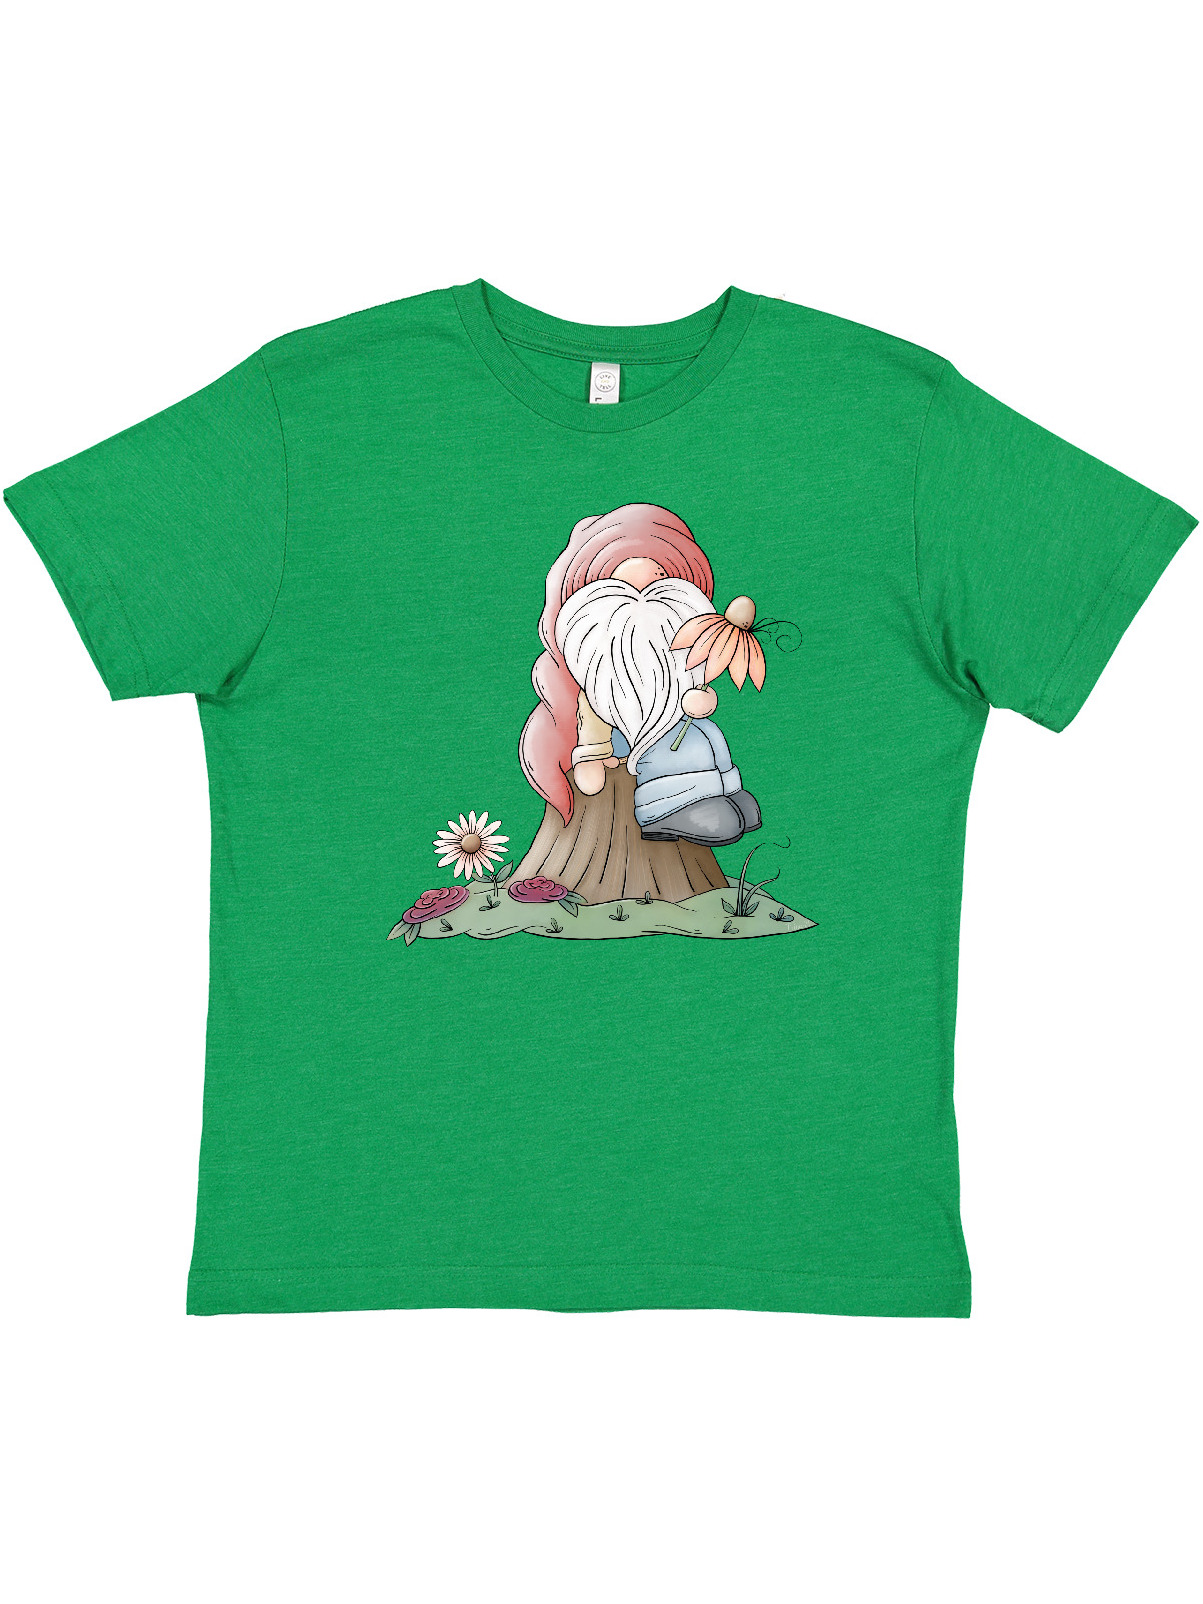 Inktastic Spring Gnome Youth T-Shirt - image 1 of 4